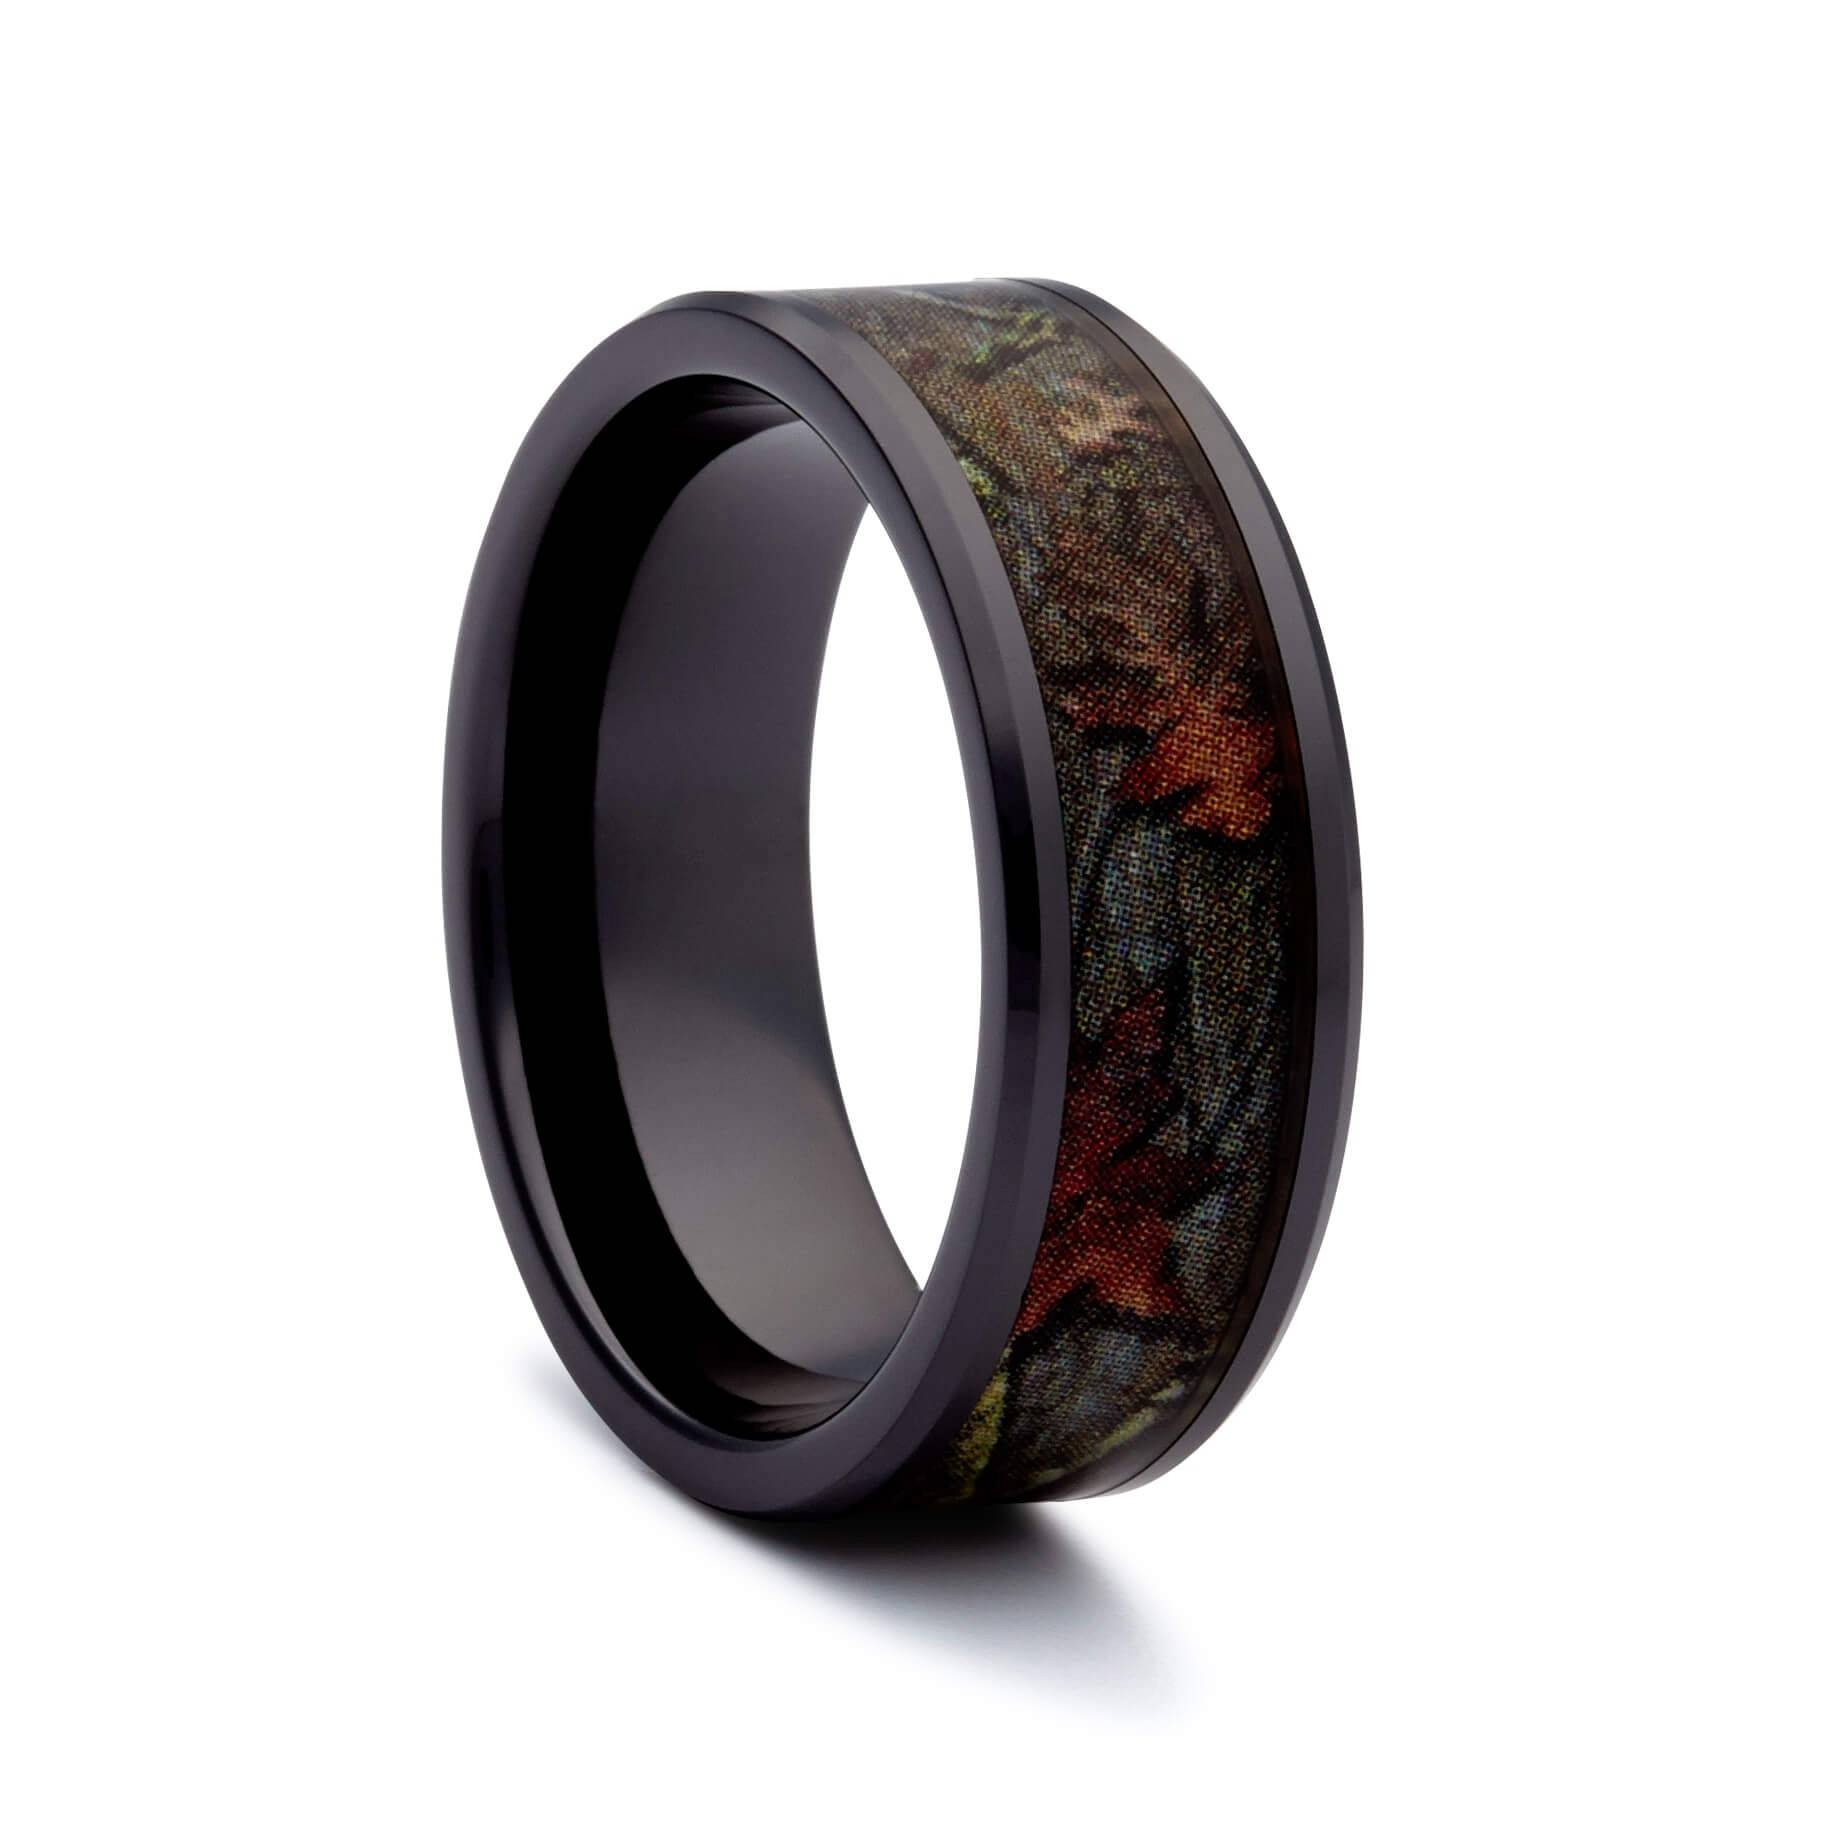 Black Onyx Wedding Ring
 15 Best Collection of Mens Black yx Wedding Rings